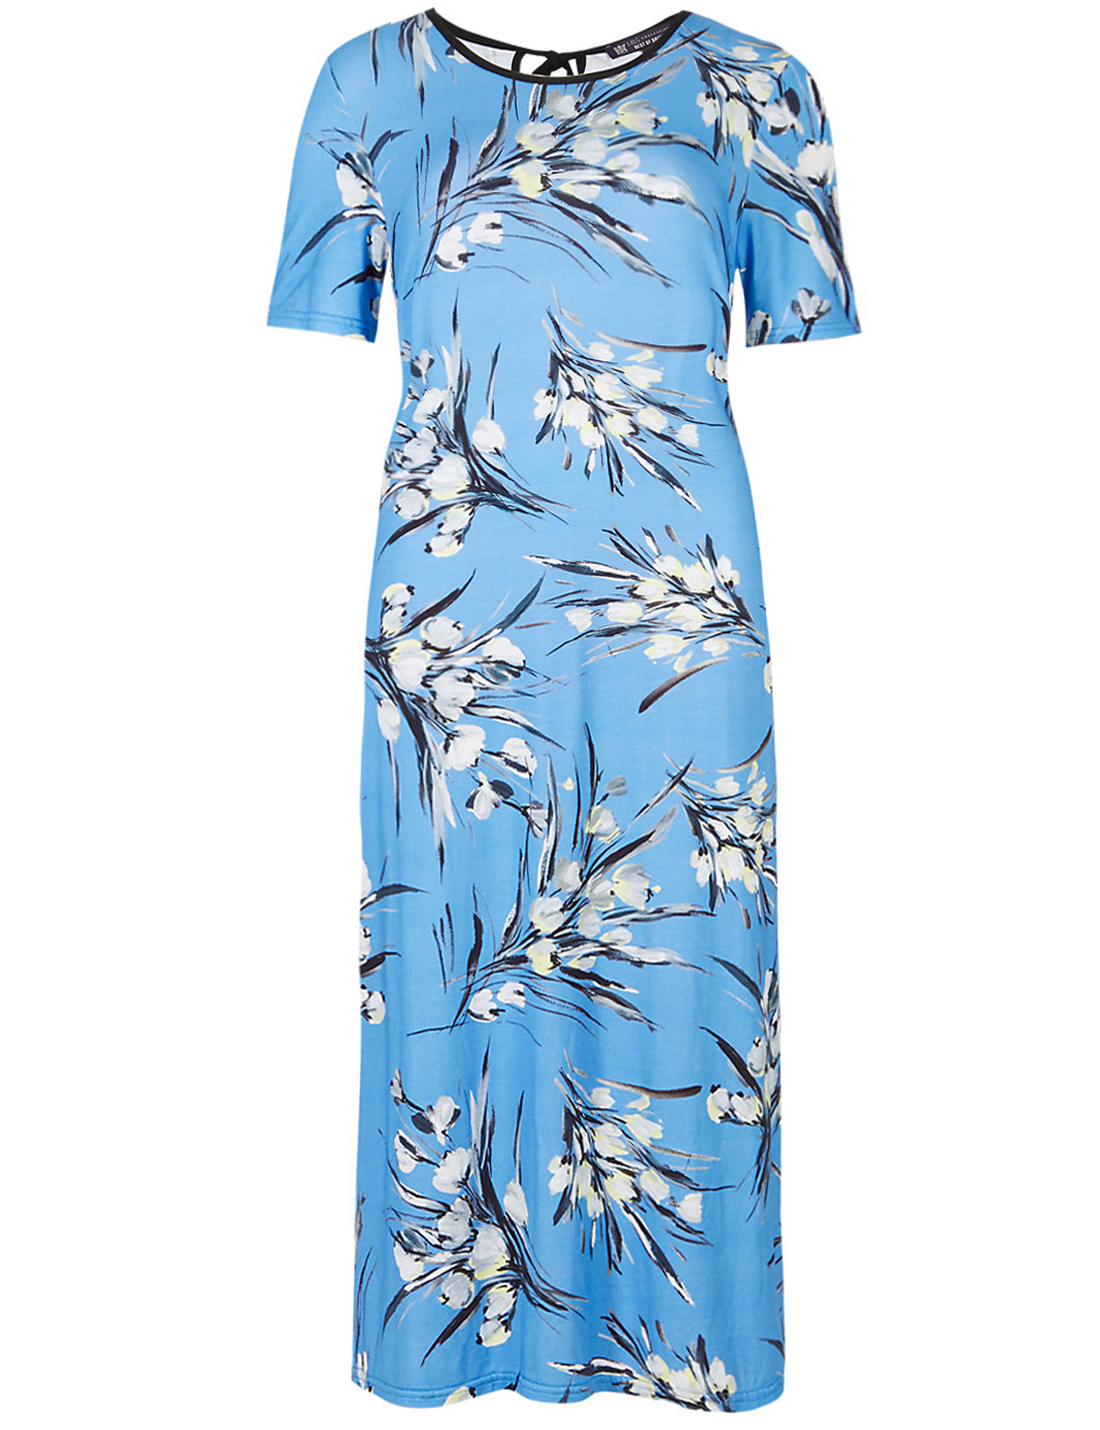 Marks and Spencer - - M&5 BLUE Floral Column Dress - Size 6 to 18